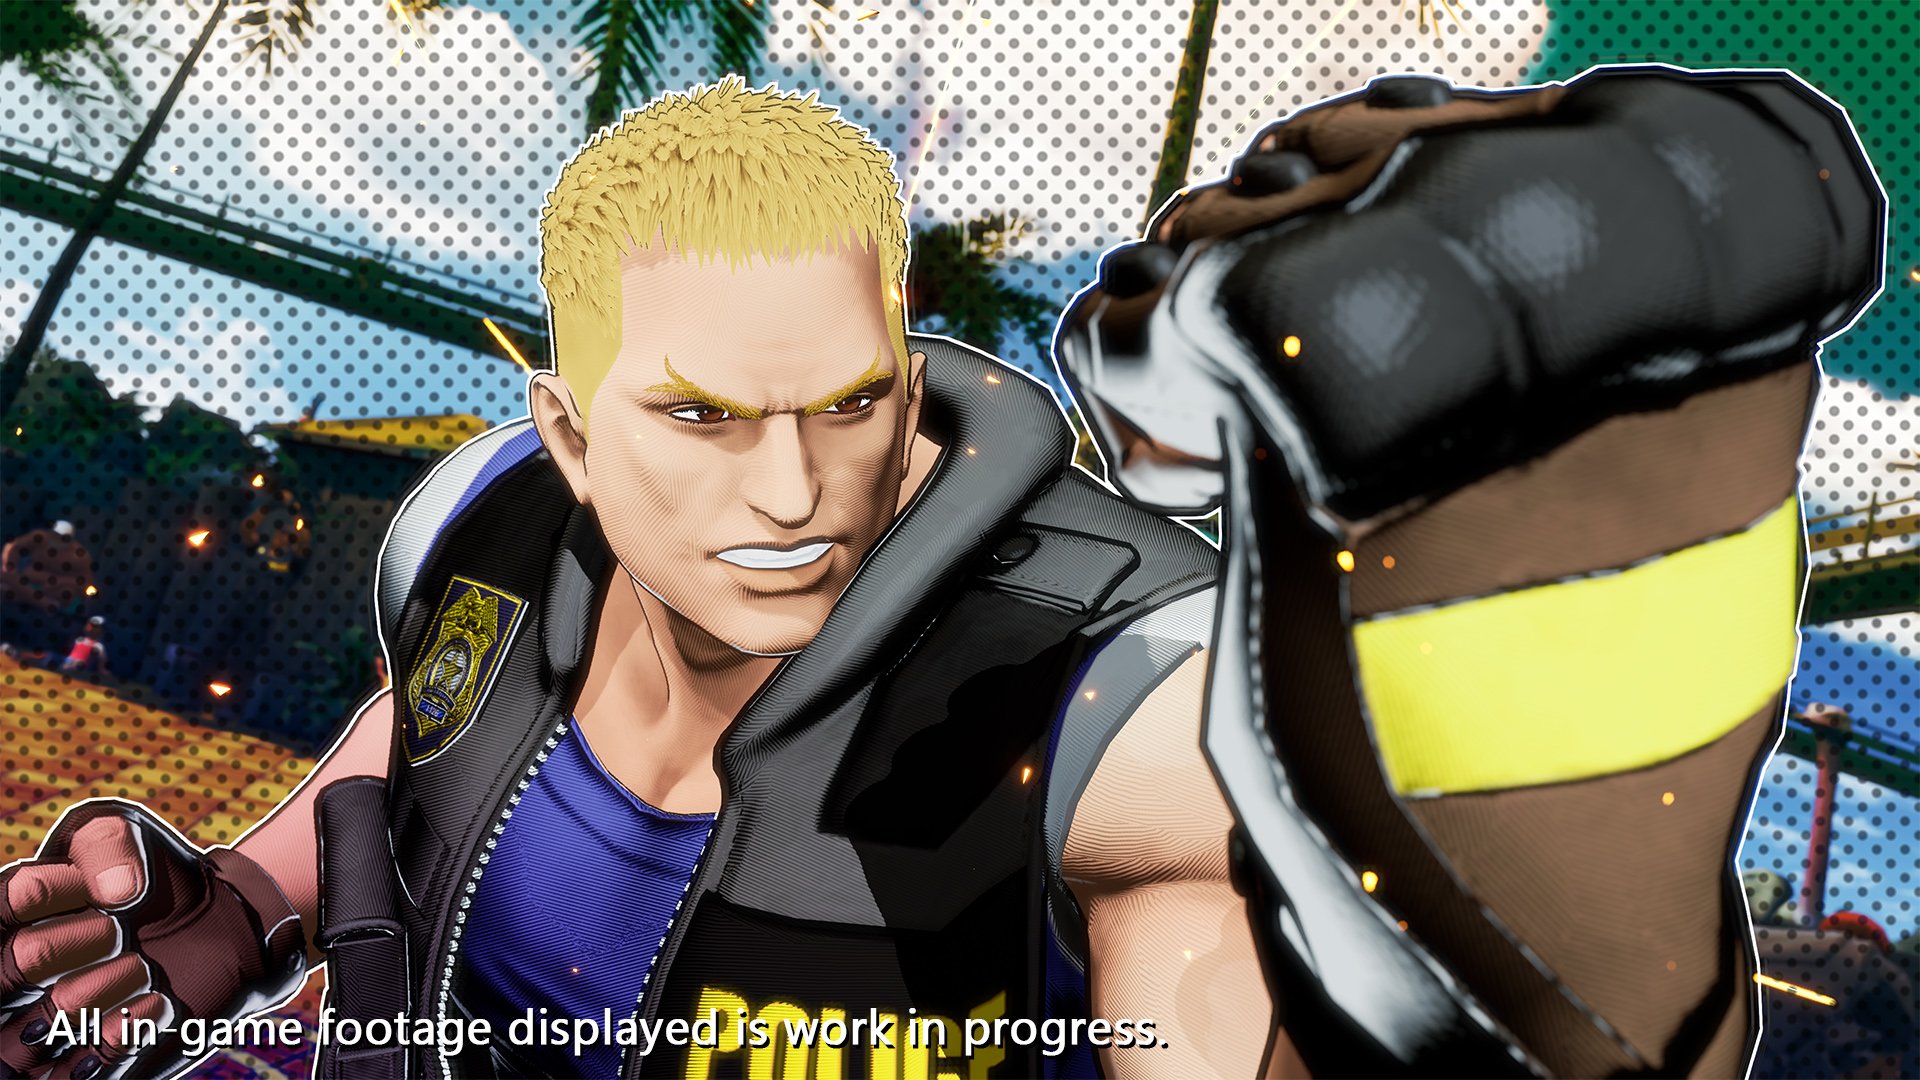 Fatal Fury: City of the Wolves adds Kevin Rian